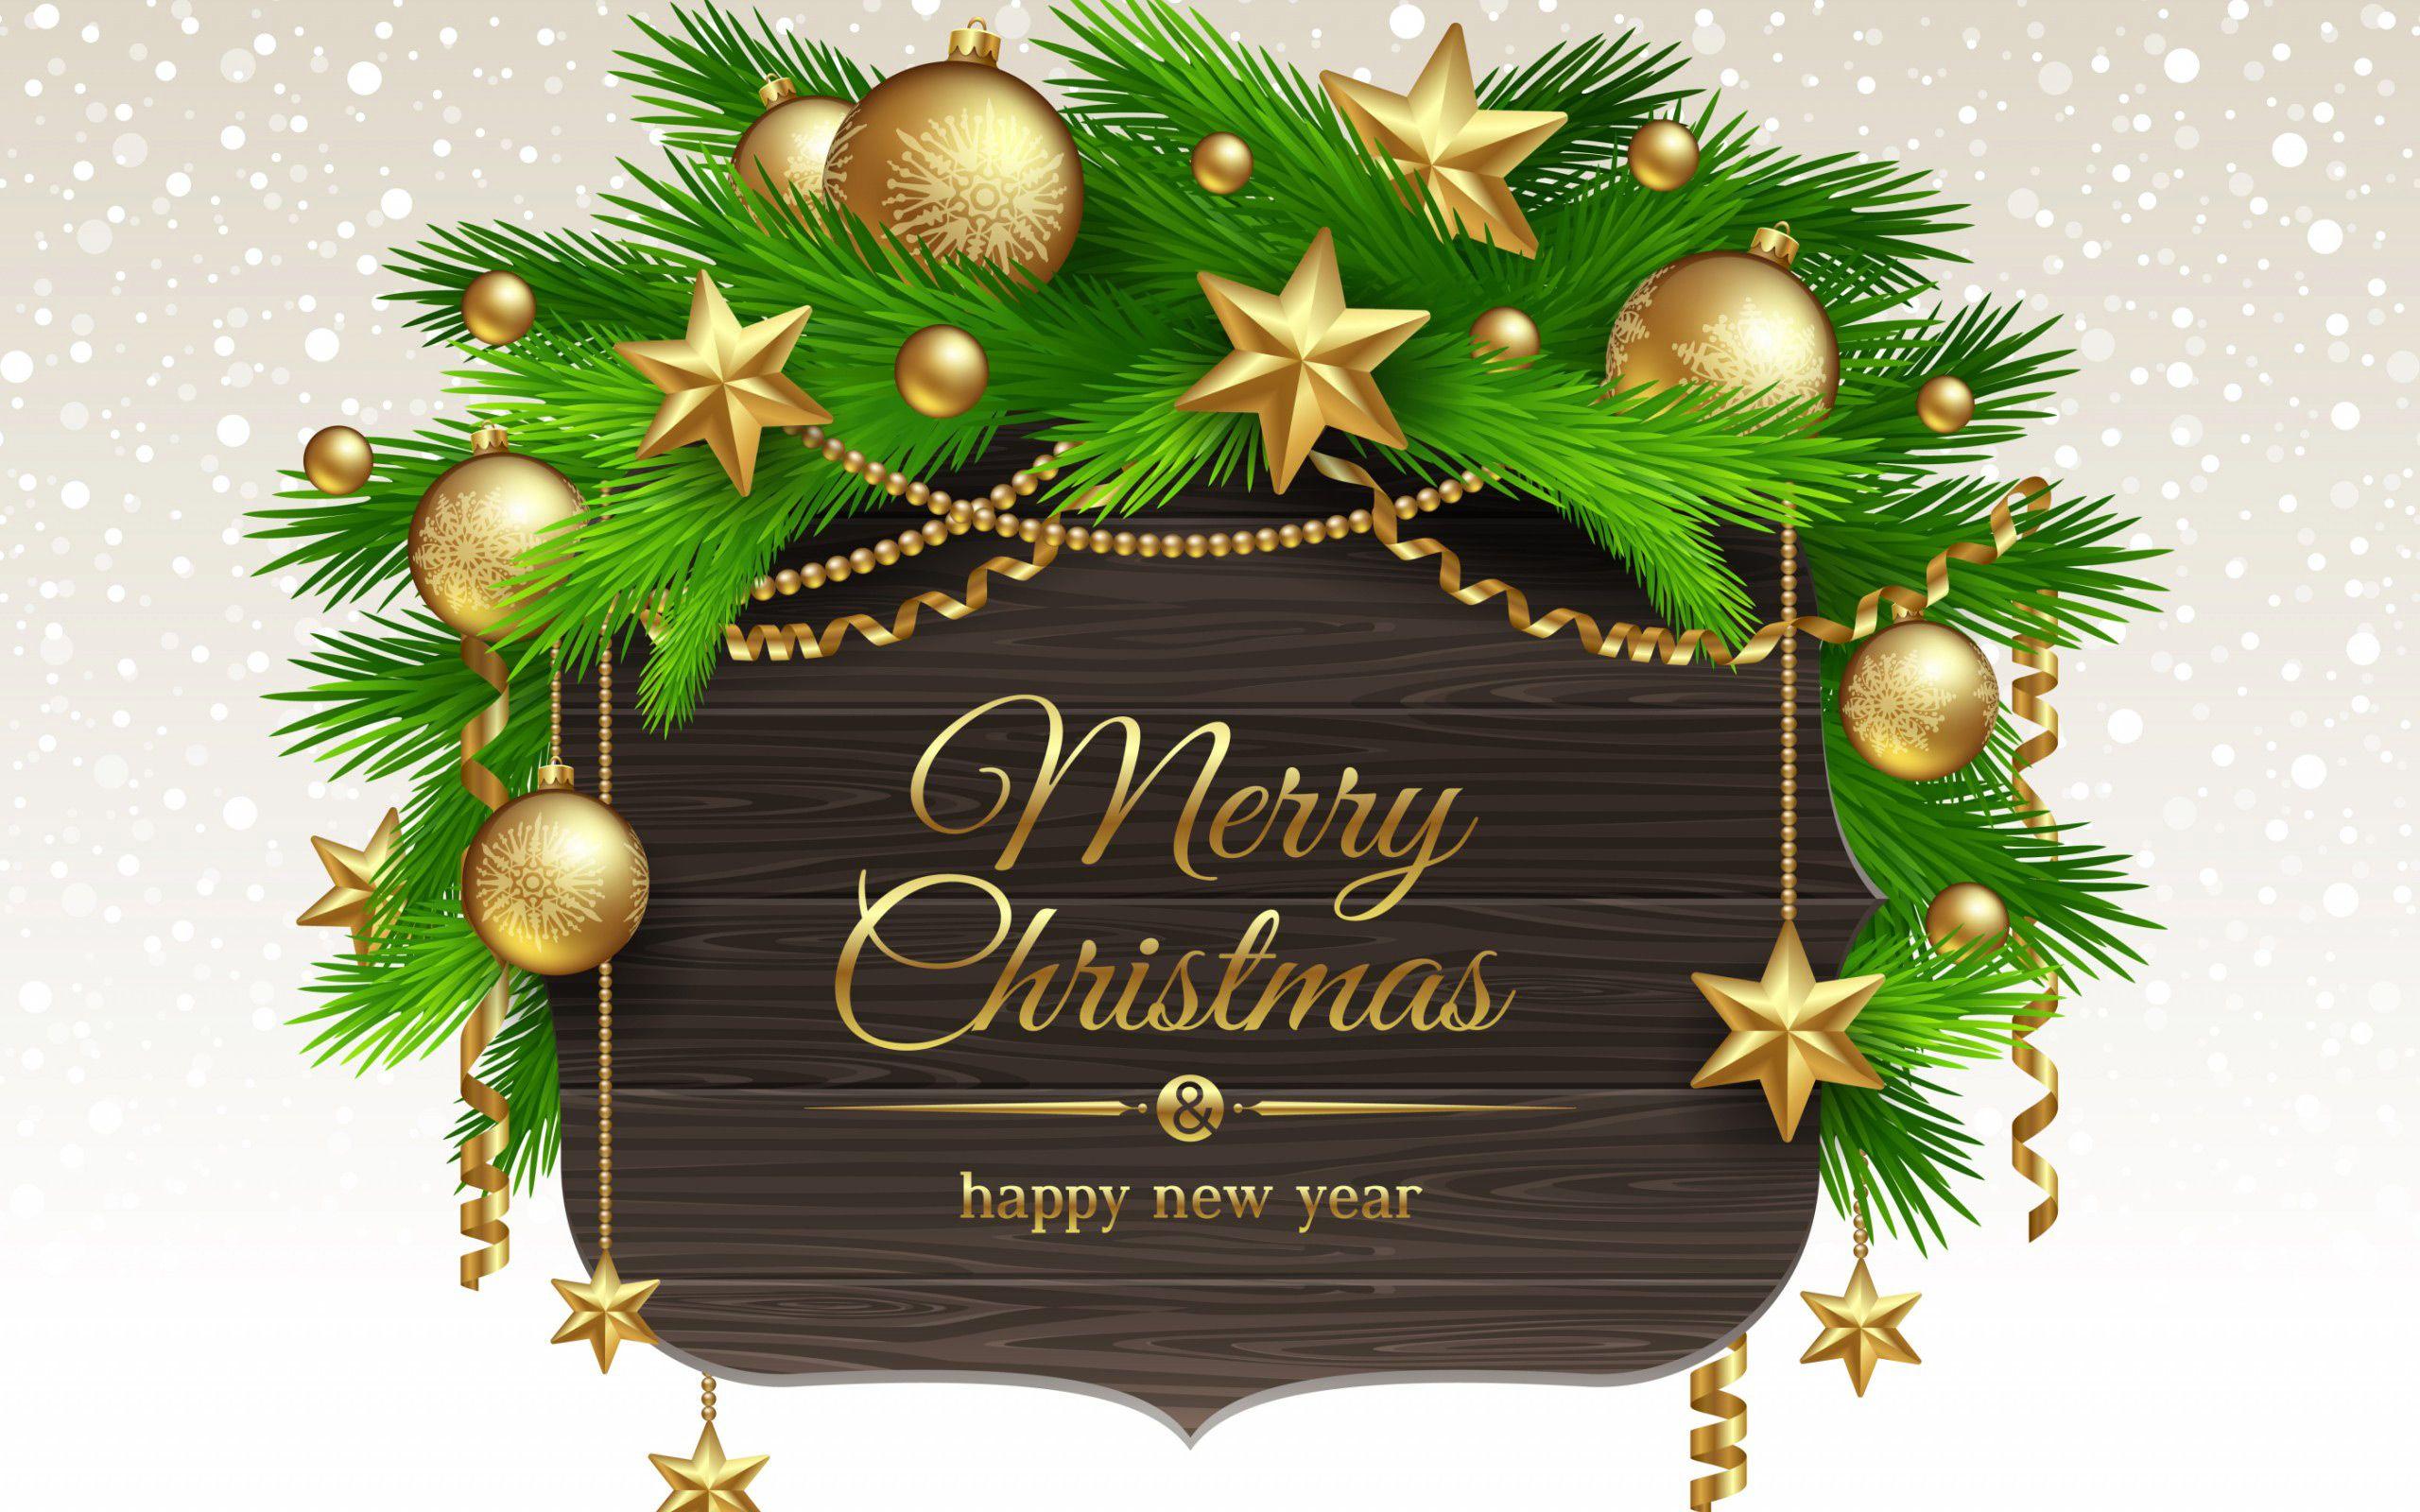 Merry Christmas Happy New Year Background​-Quality Free Image and Transparent PNG Clipart